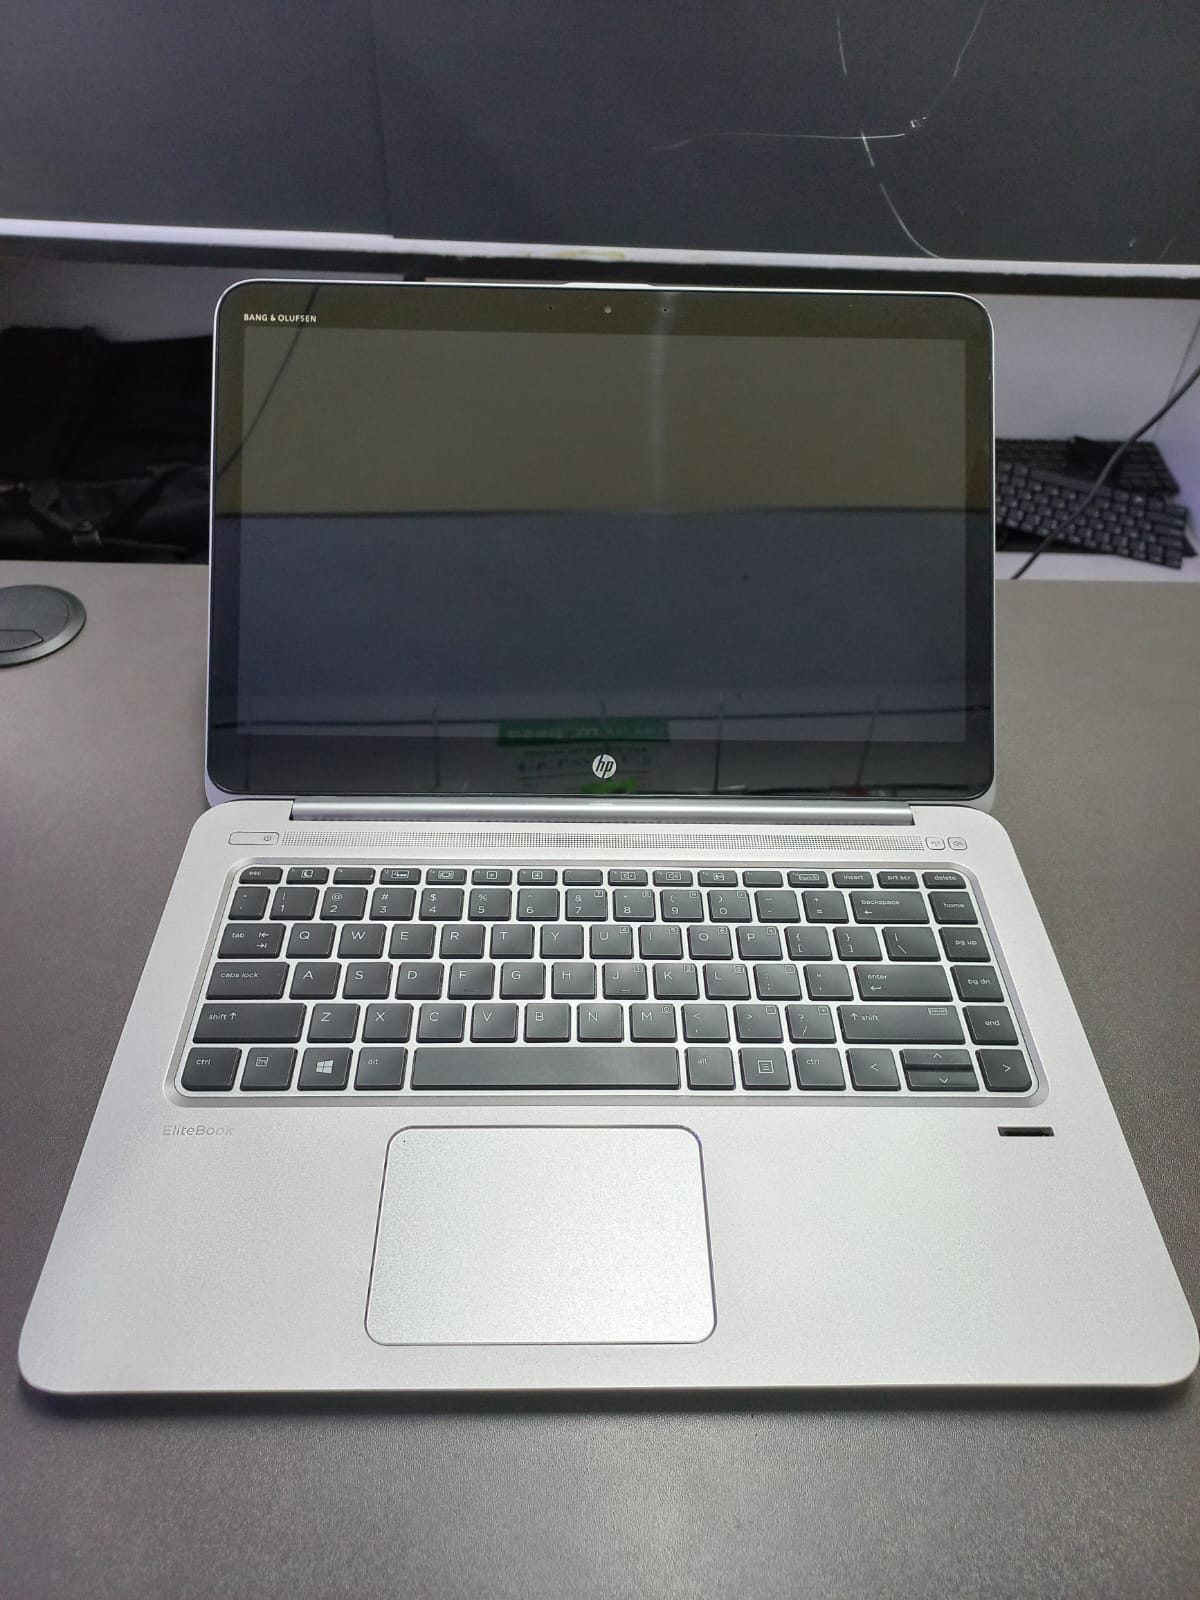 New Hp Elitebook 1040 g3 Intel core i7 6th gen 16gb ram 512gb ssd 2.6ghz speed Touchscreen and backlit